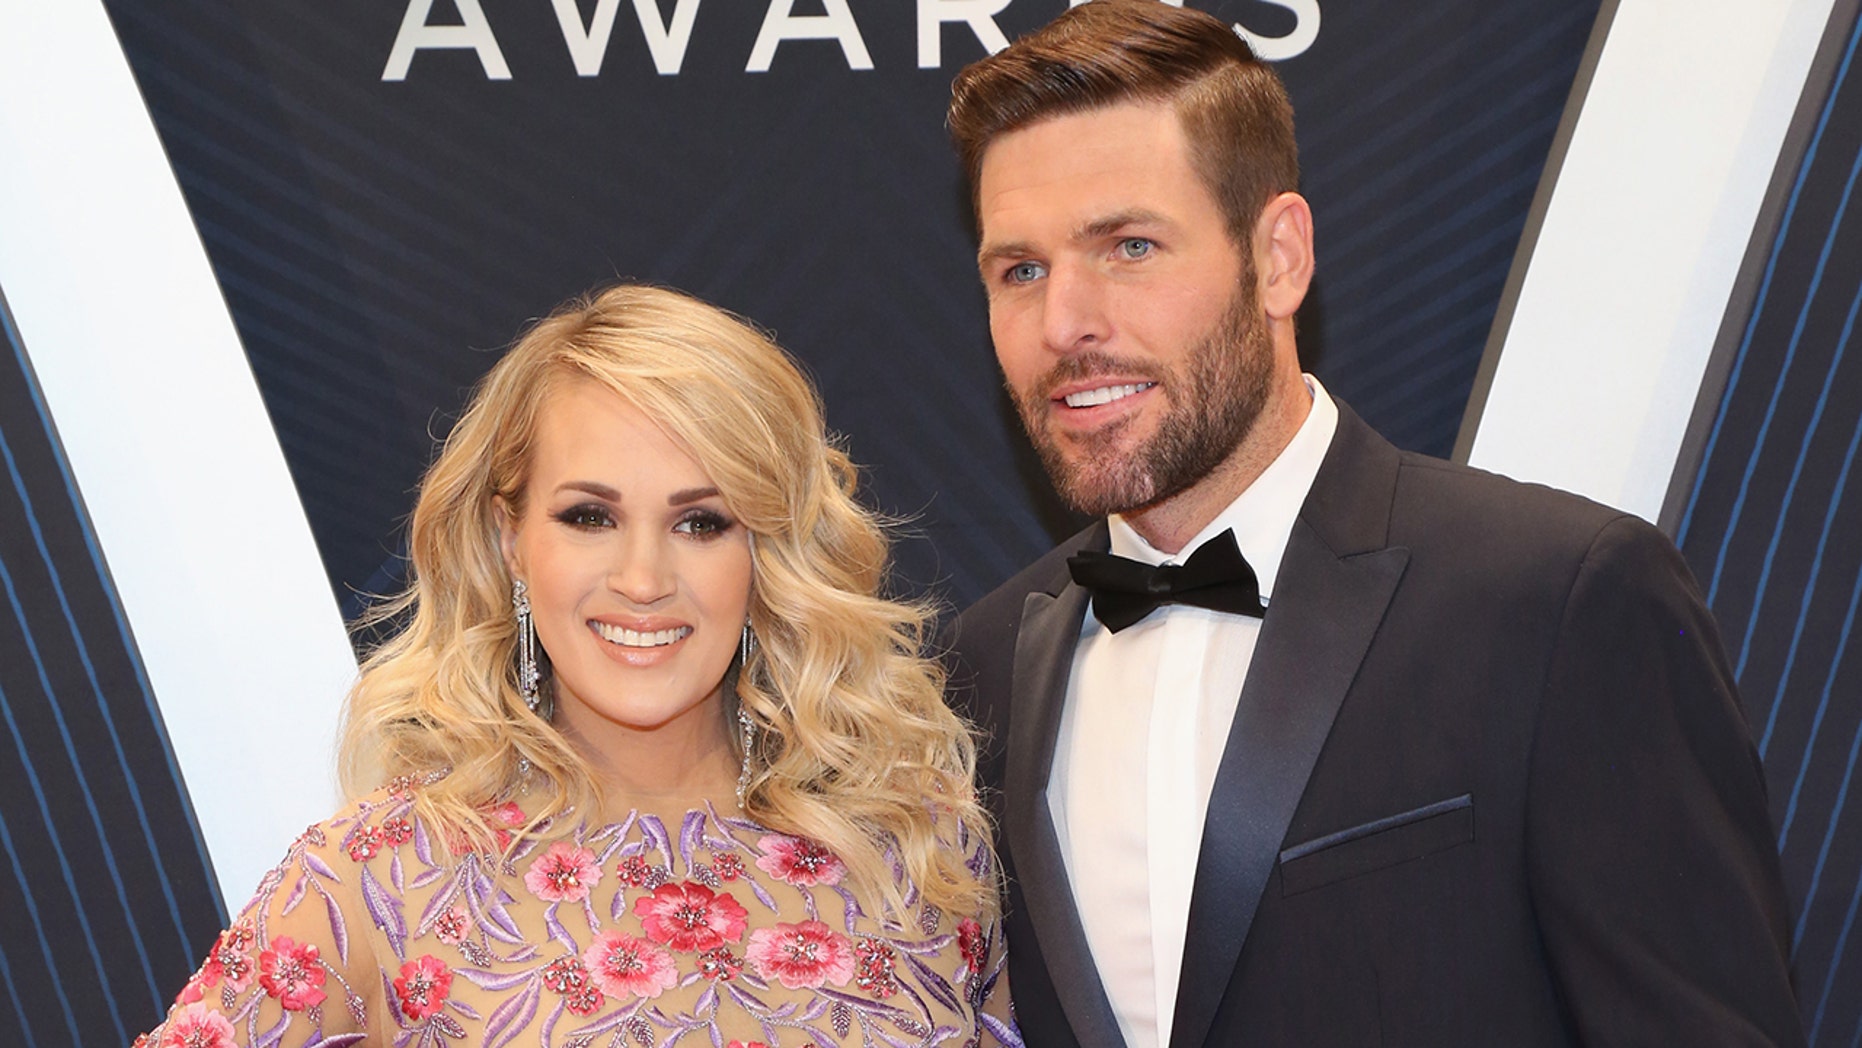 Pregnant Carrie Underwood and husband Mike Fisher adopt new puppy